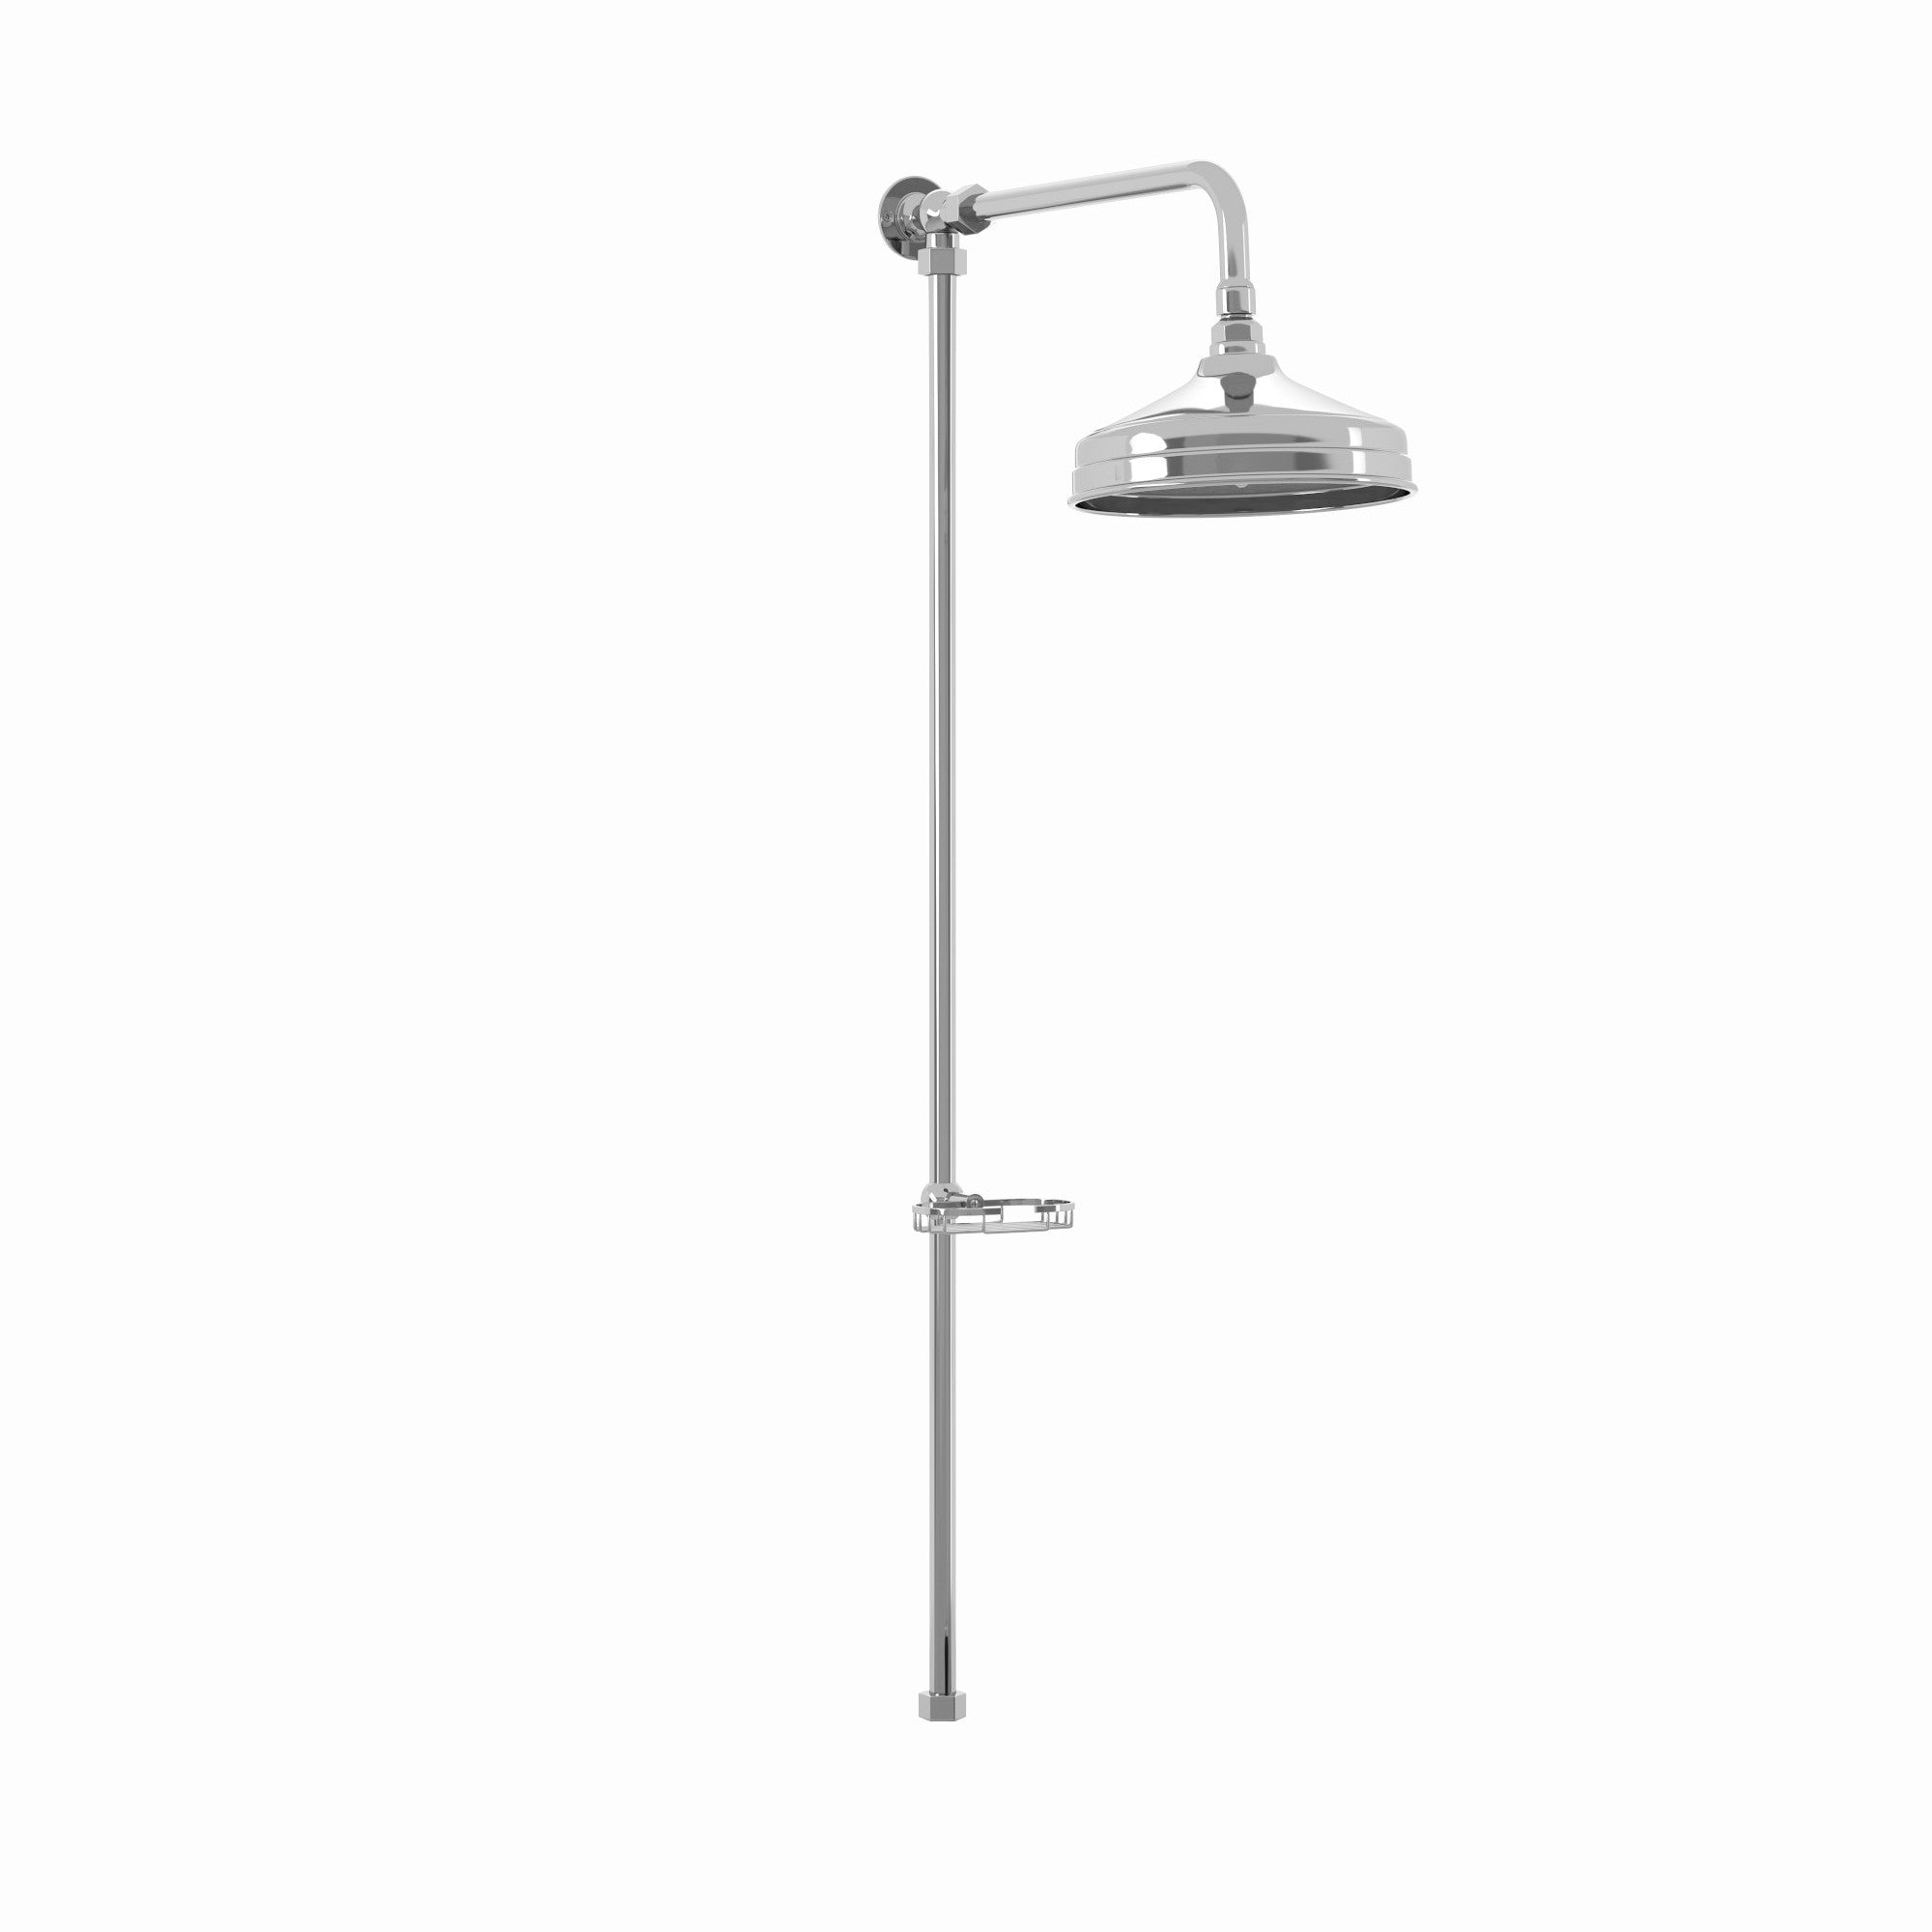 Downton traditional shower riser rail kit with soap dish watercan head 200mm - chrome - Showers